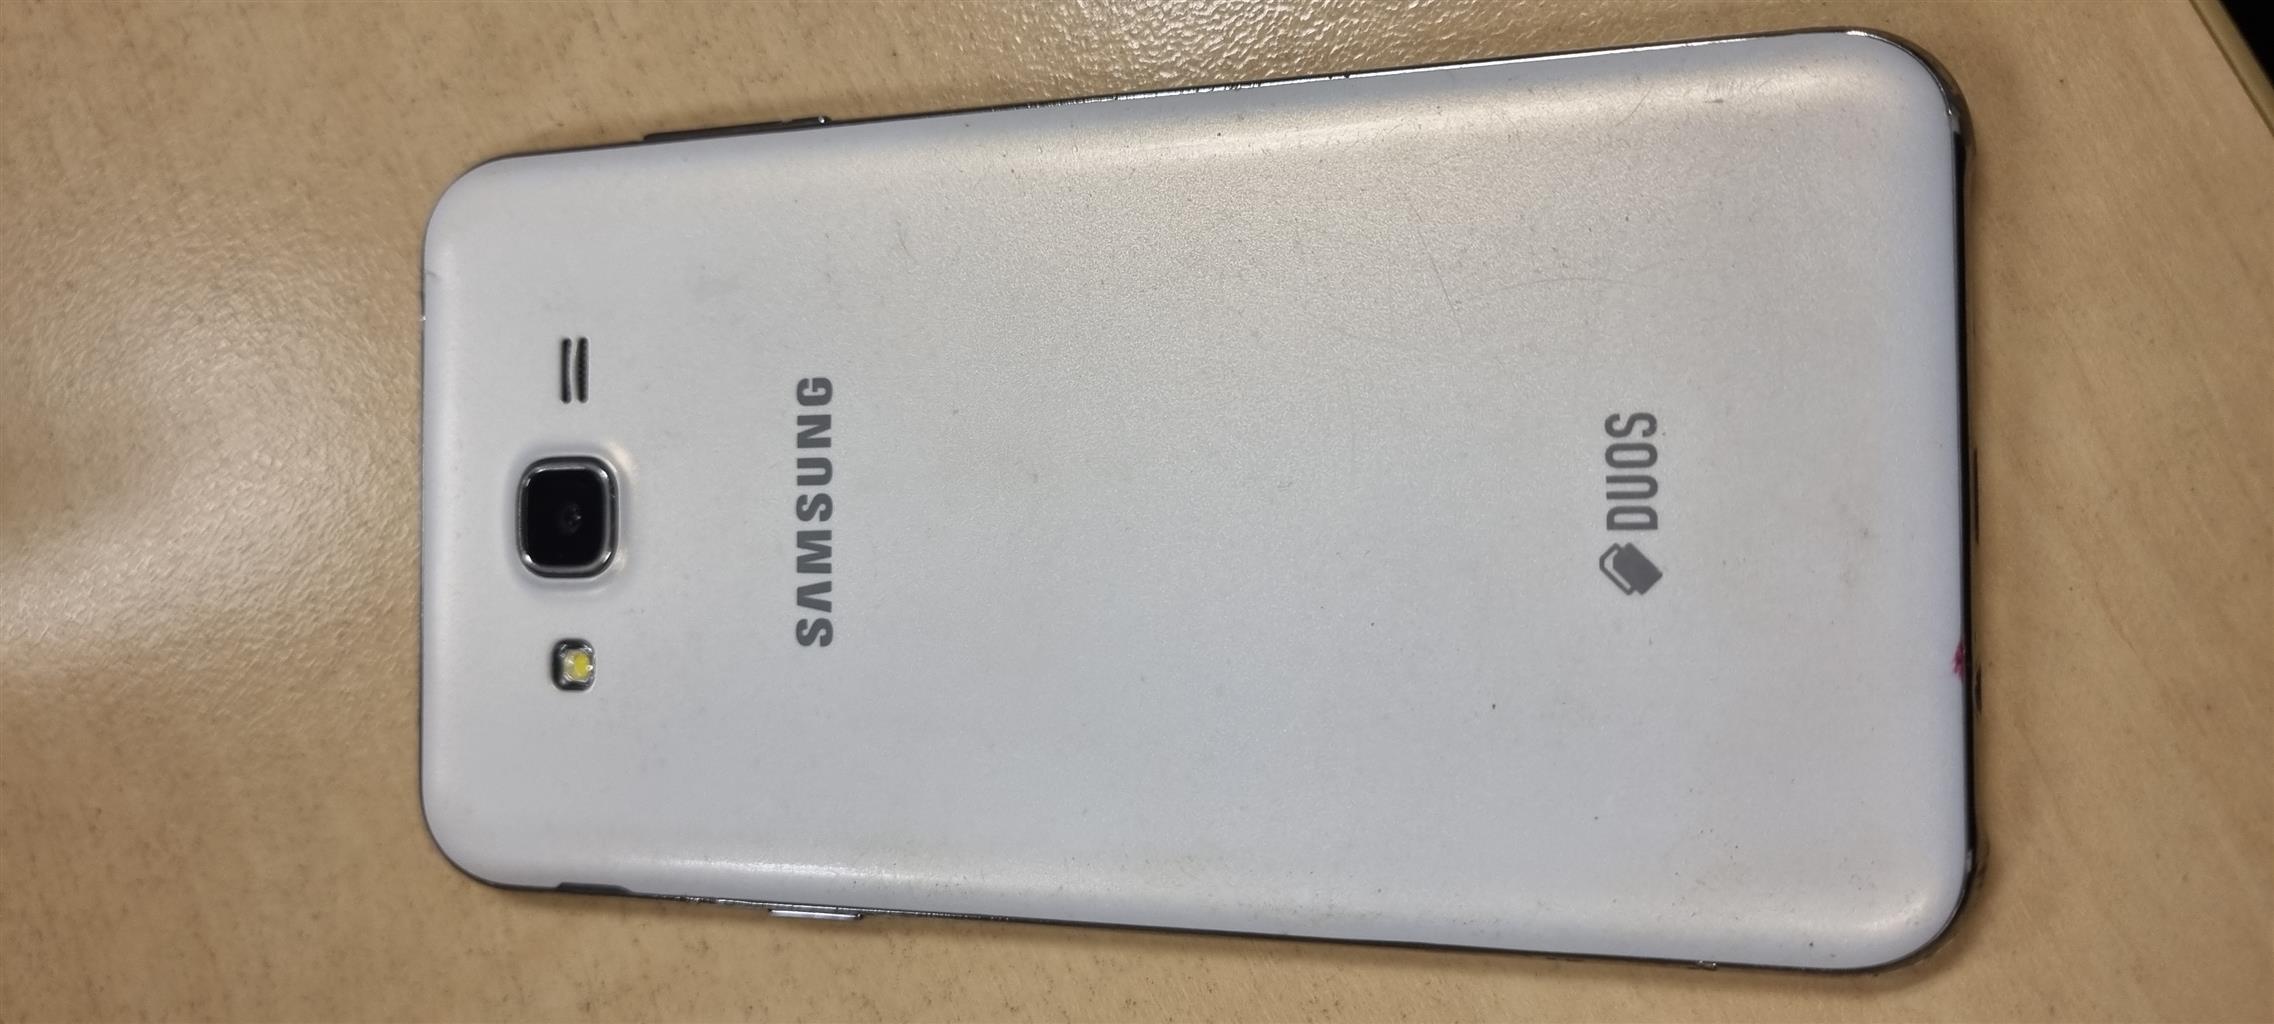 Samsung J7 Phone, White, Seconfhand in Good Condition